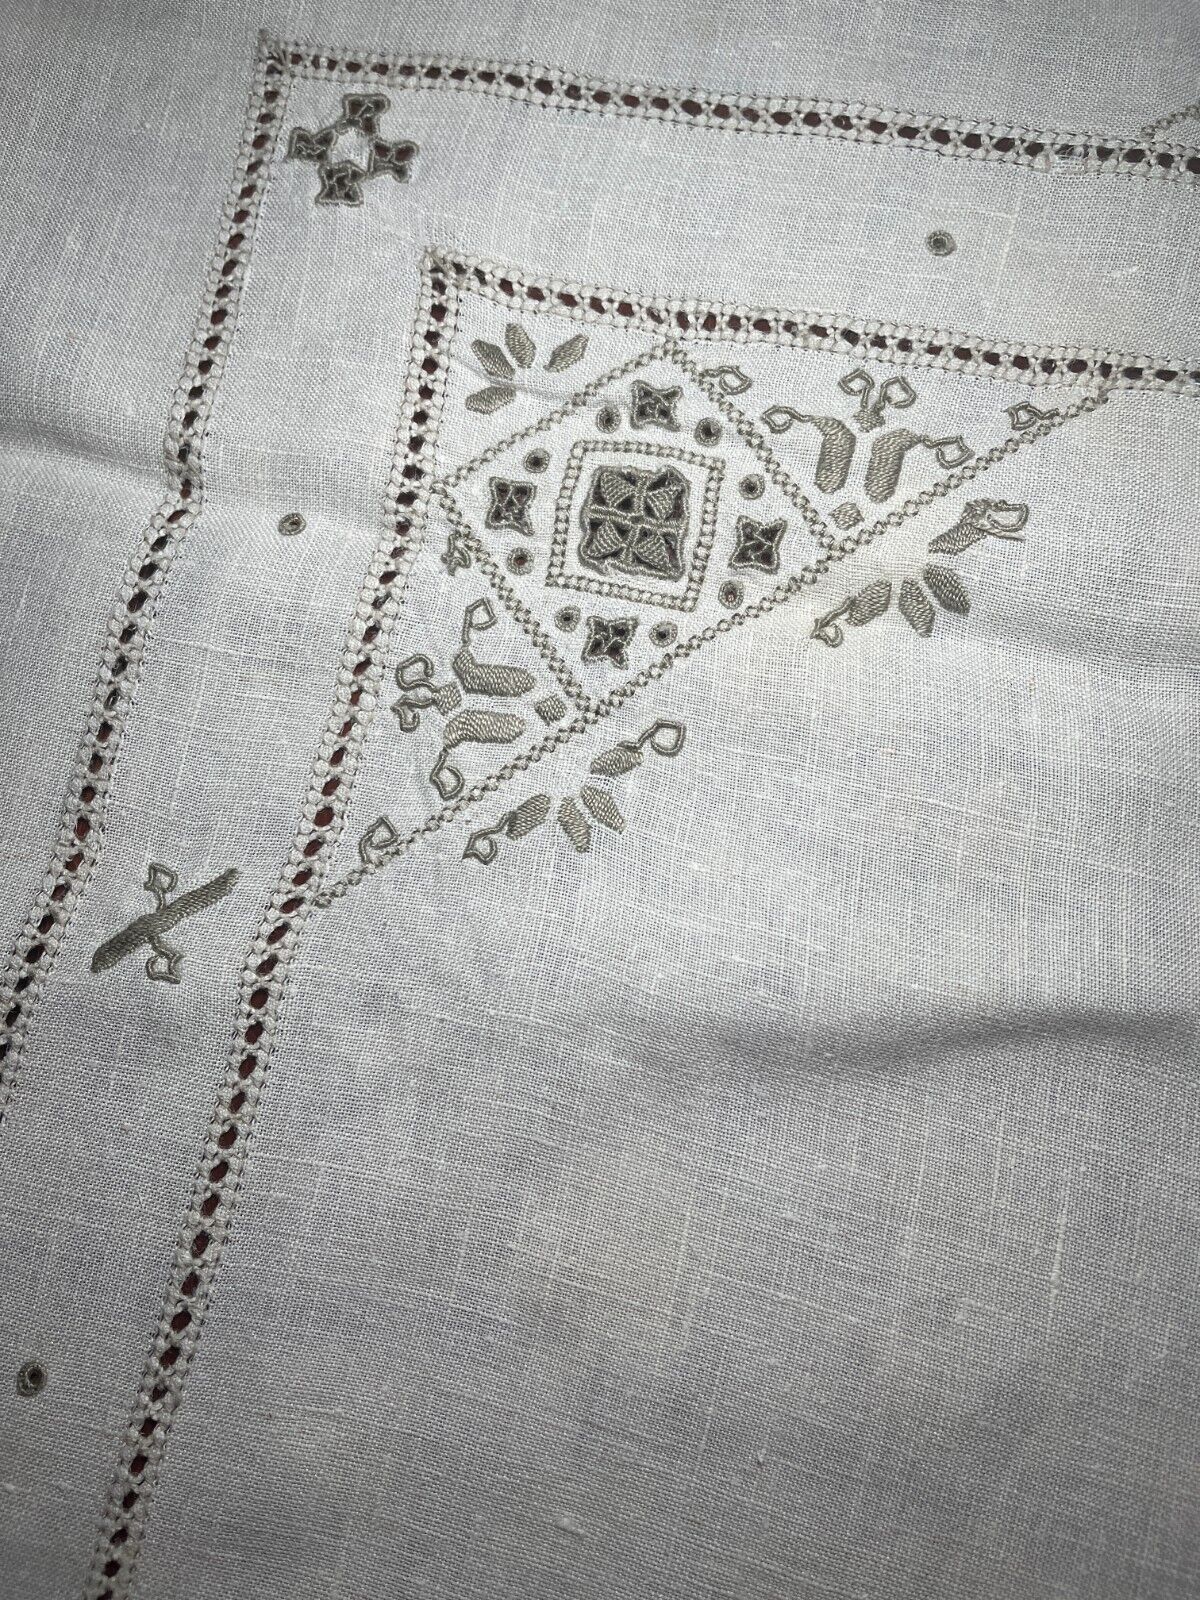 VINTAGE MADEIRA TABLECLOTH HAND EMBROIDERY CUTWORK LINEN LARGE BANQUET 8\'x5.5\'